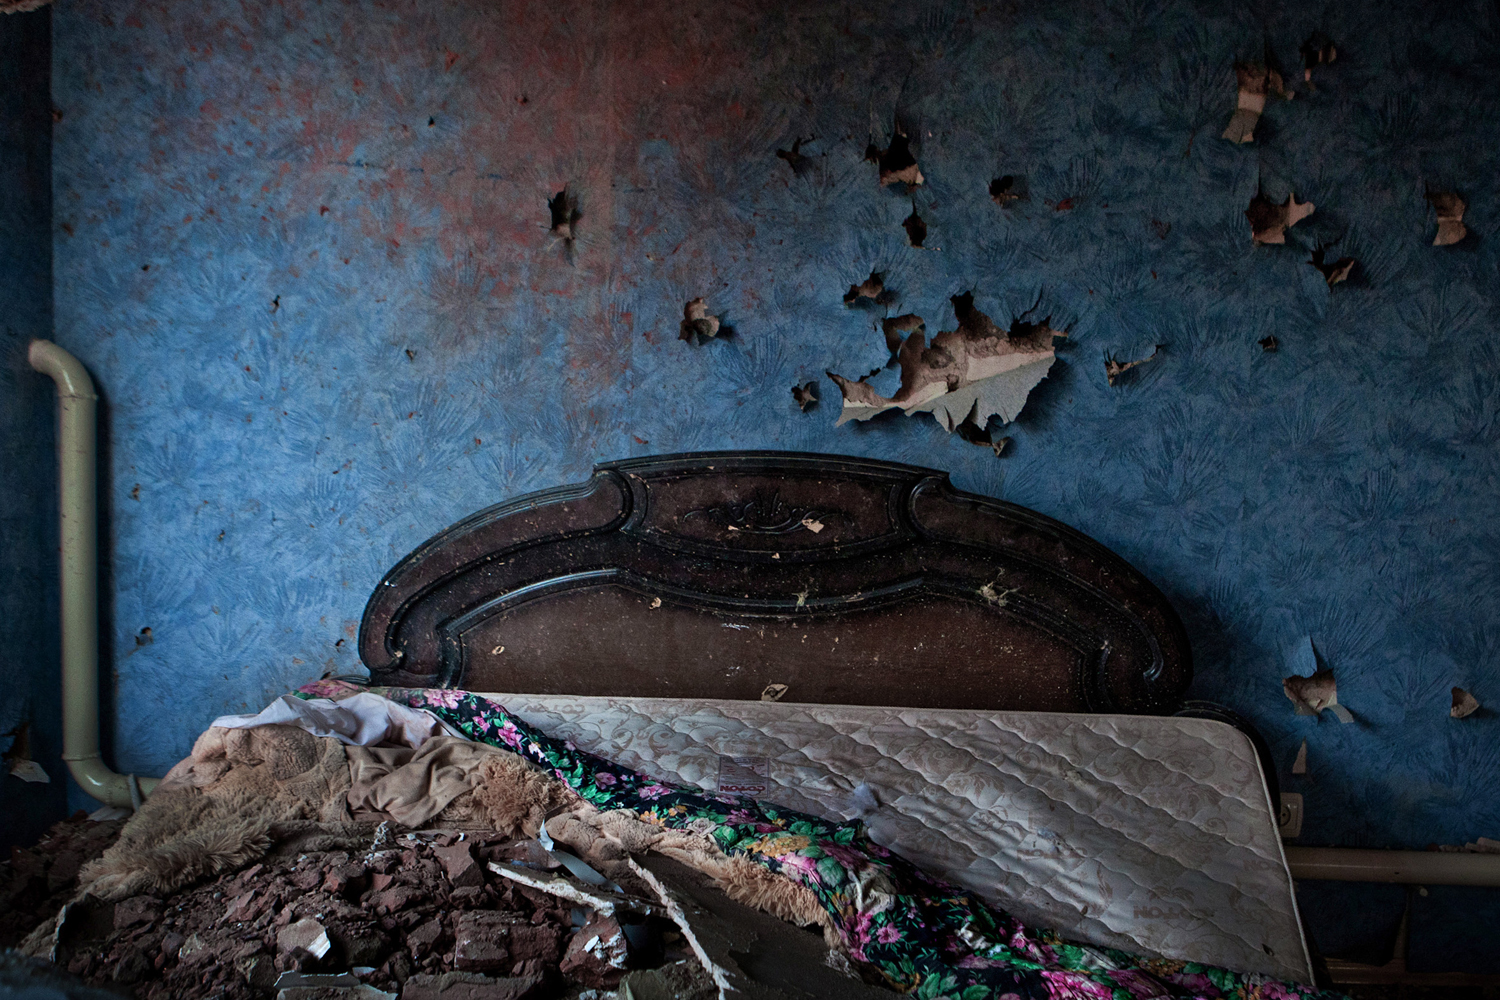 A bed seen in the house after the special forces operation when 4 people were killed suspected to be insurgents.